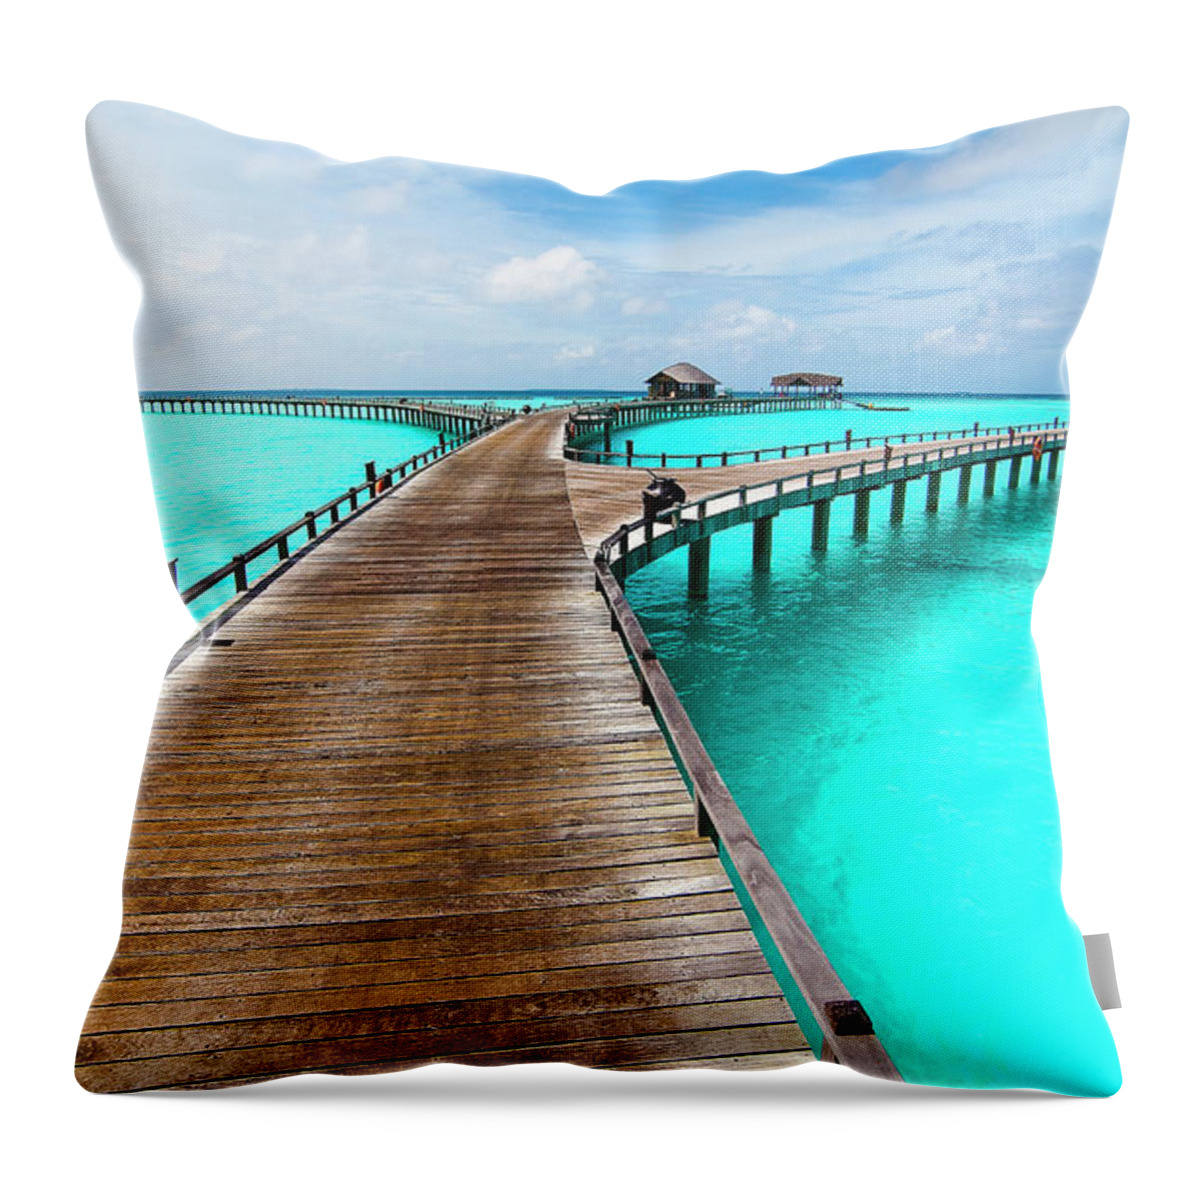 Tranquility Throw Pillow featuring the photograph Wooden Jetty by Luismaxx